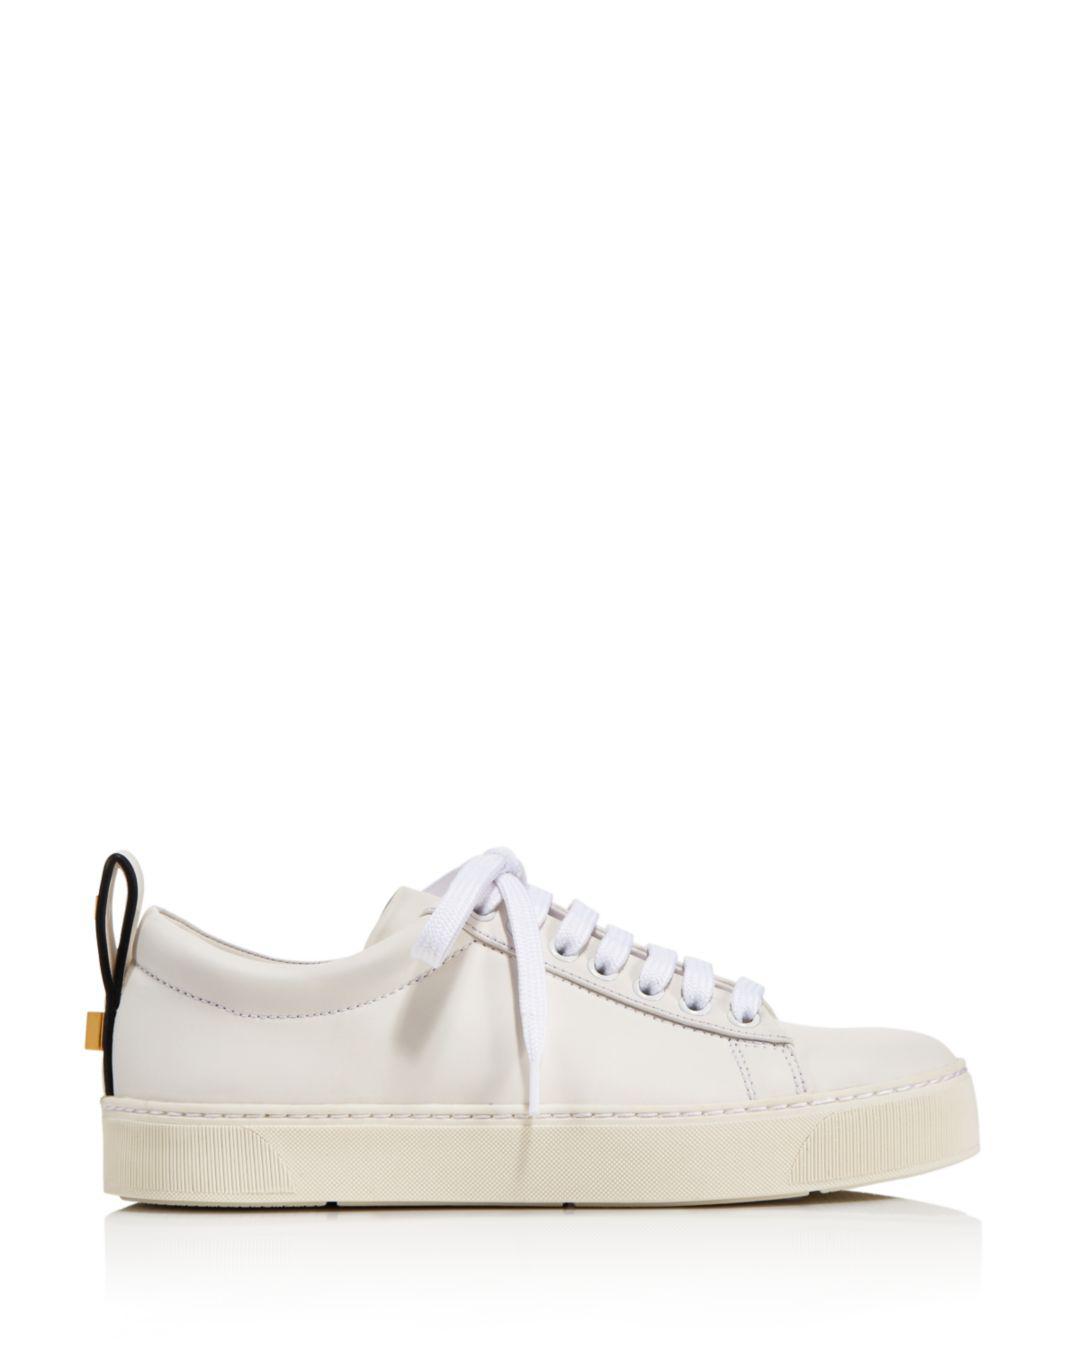 Stuart Weitzman Women's Aoki Lace-up Leather Sneakers in Cream (White ...